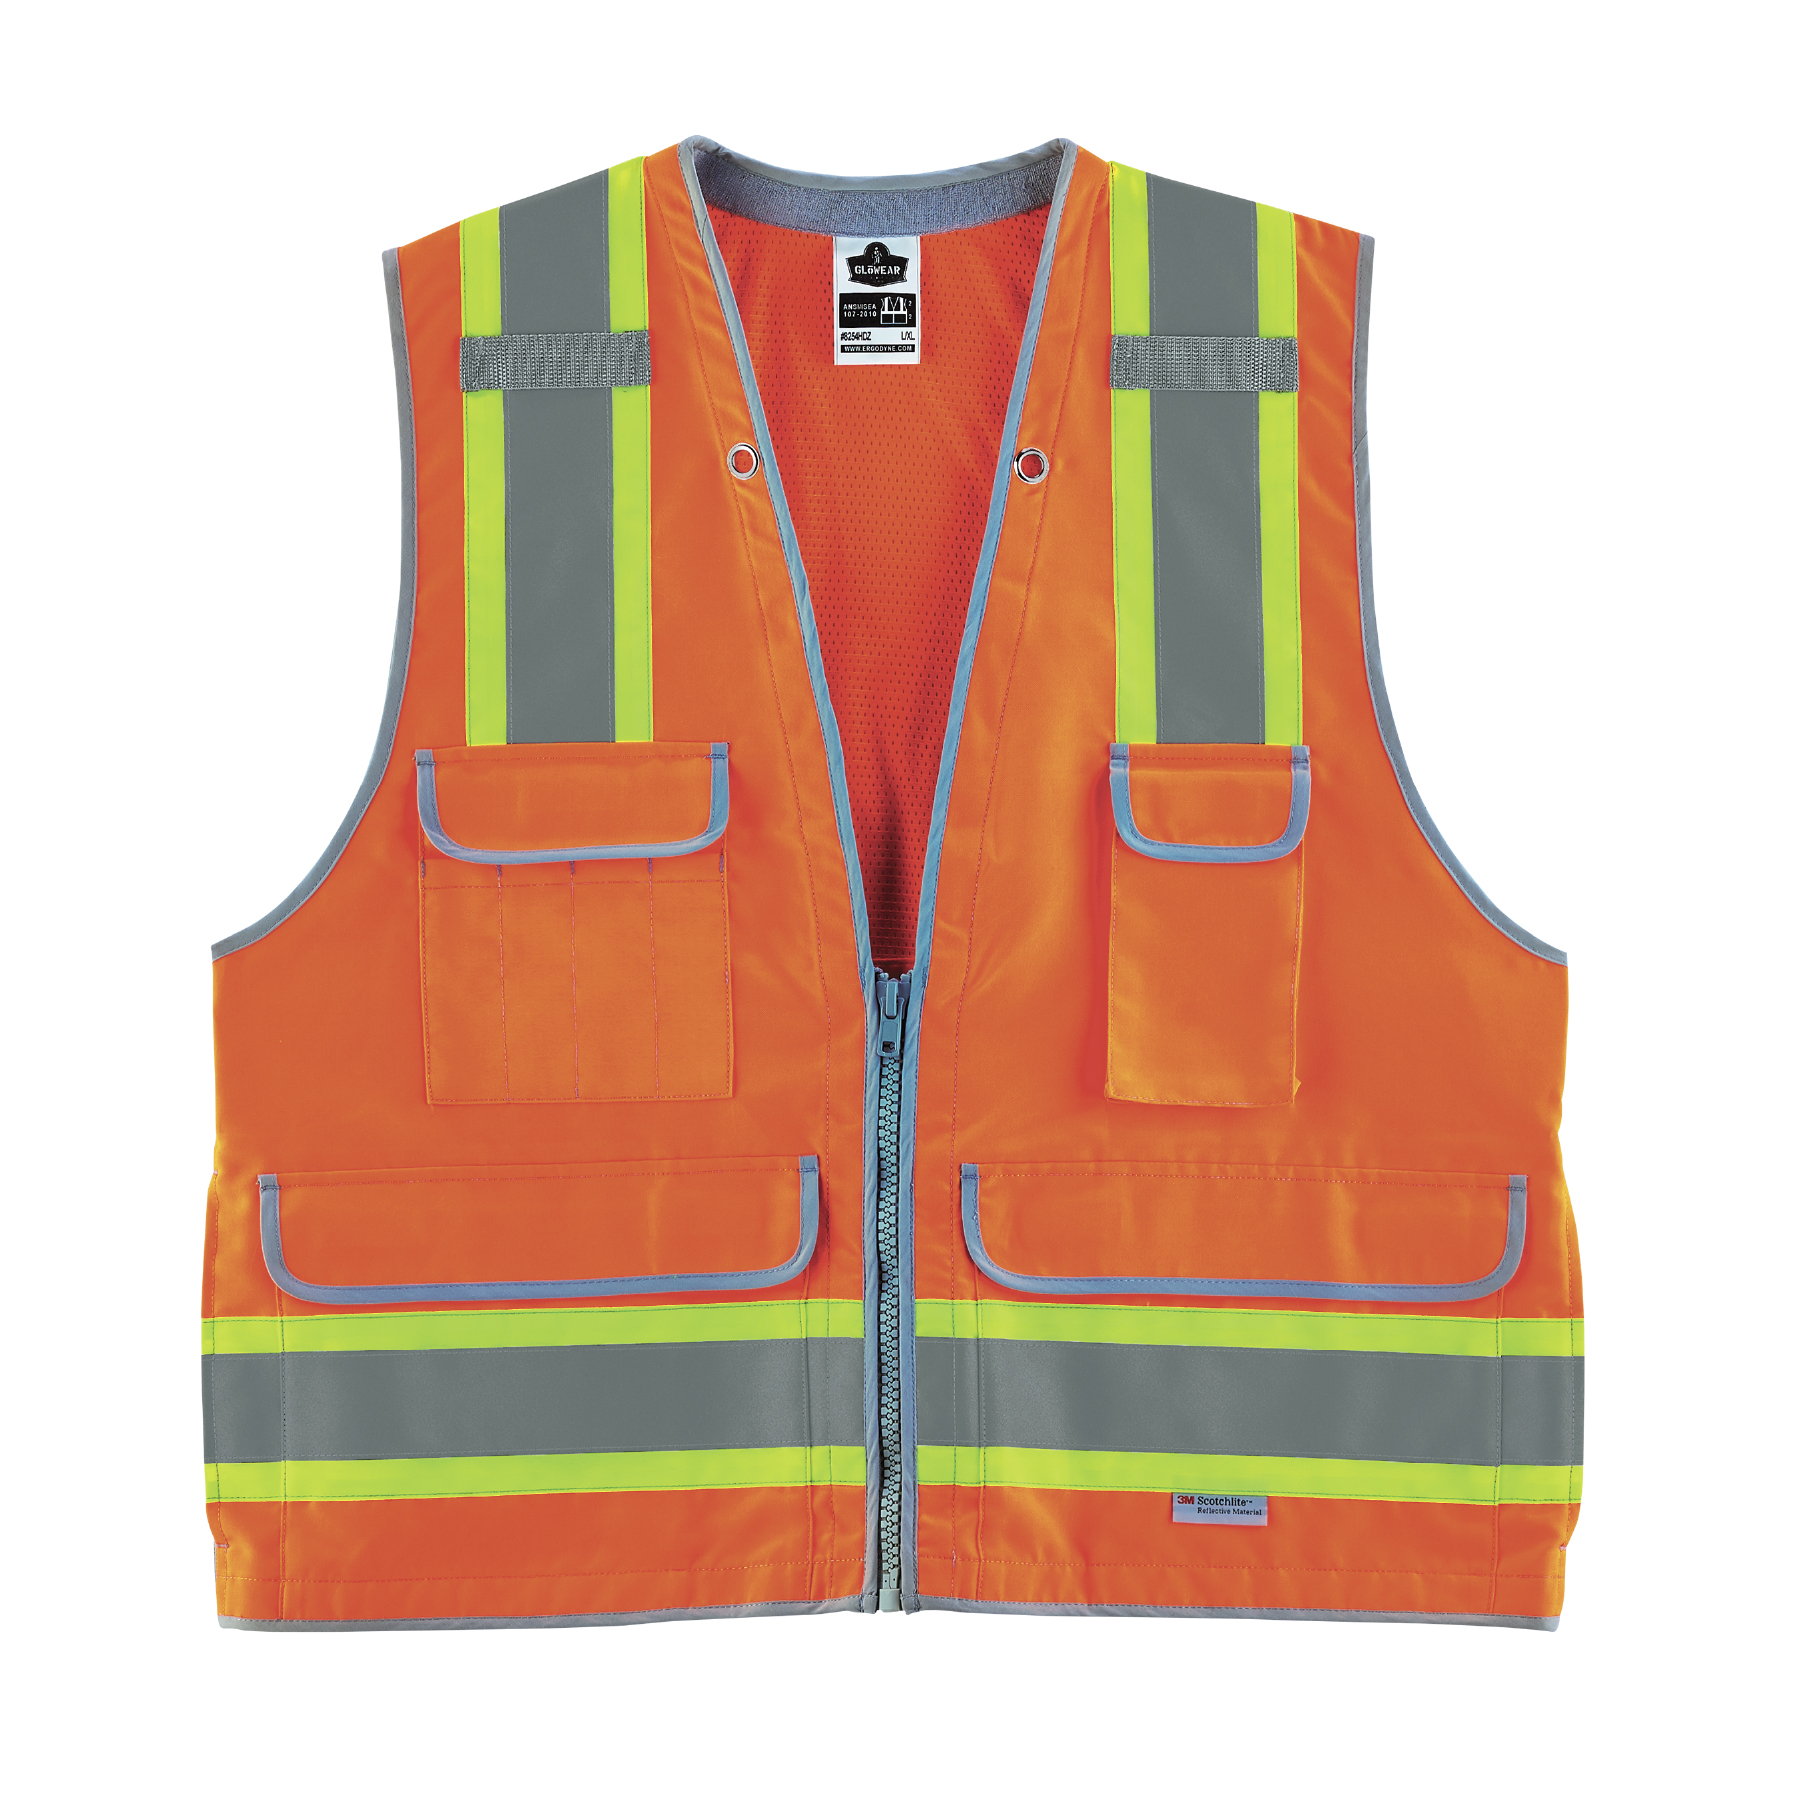 HIGH VISIBILITY VEST FABRIC/NET TYPE (5 POCKETS) Protective